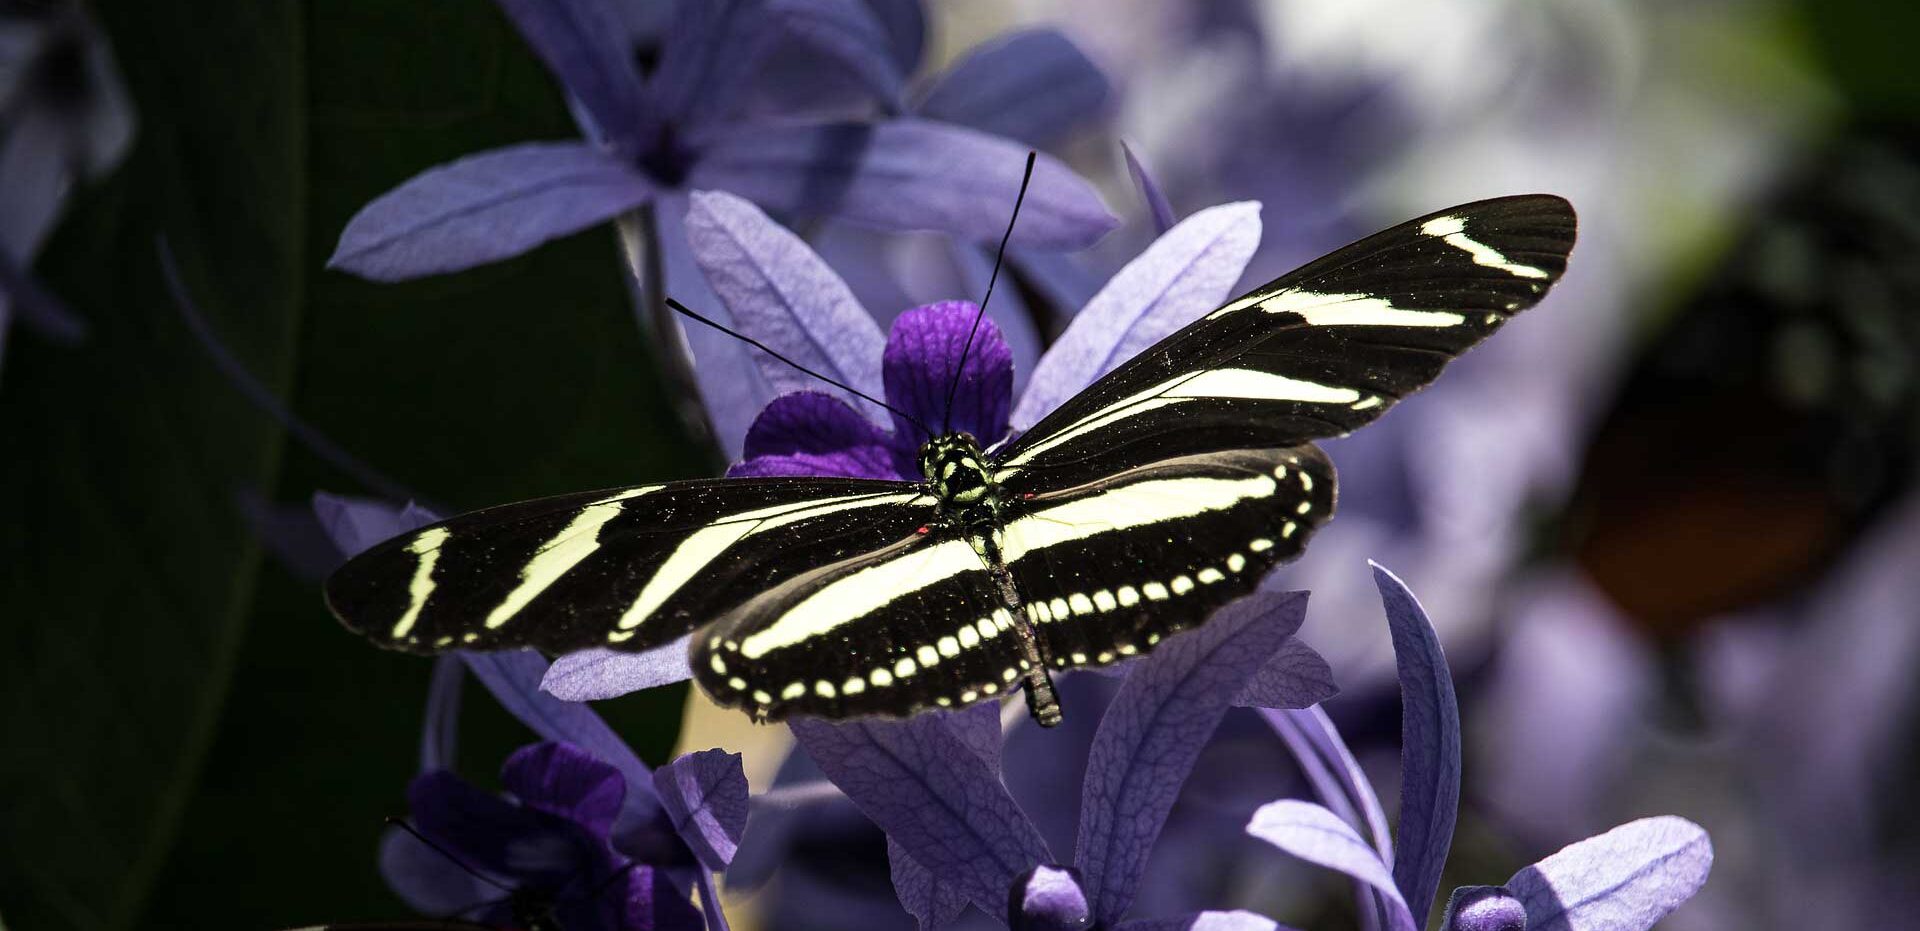 Close up of black and white striped butterfly resting on violet flowers with blurred background | SoulSpectives Institute